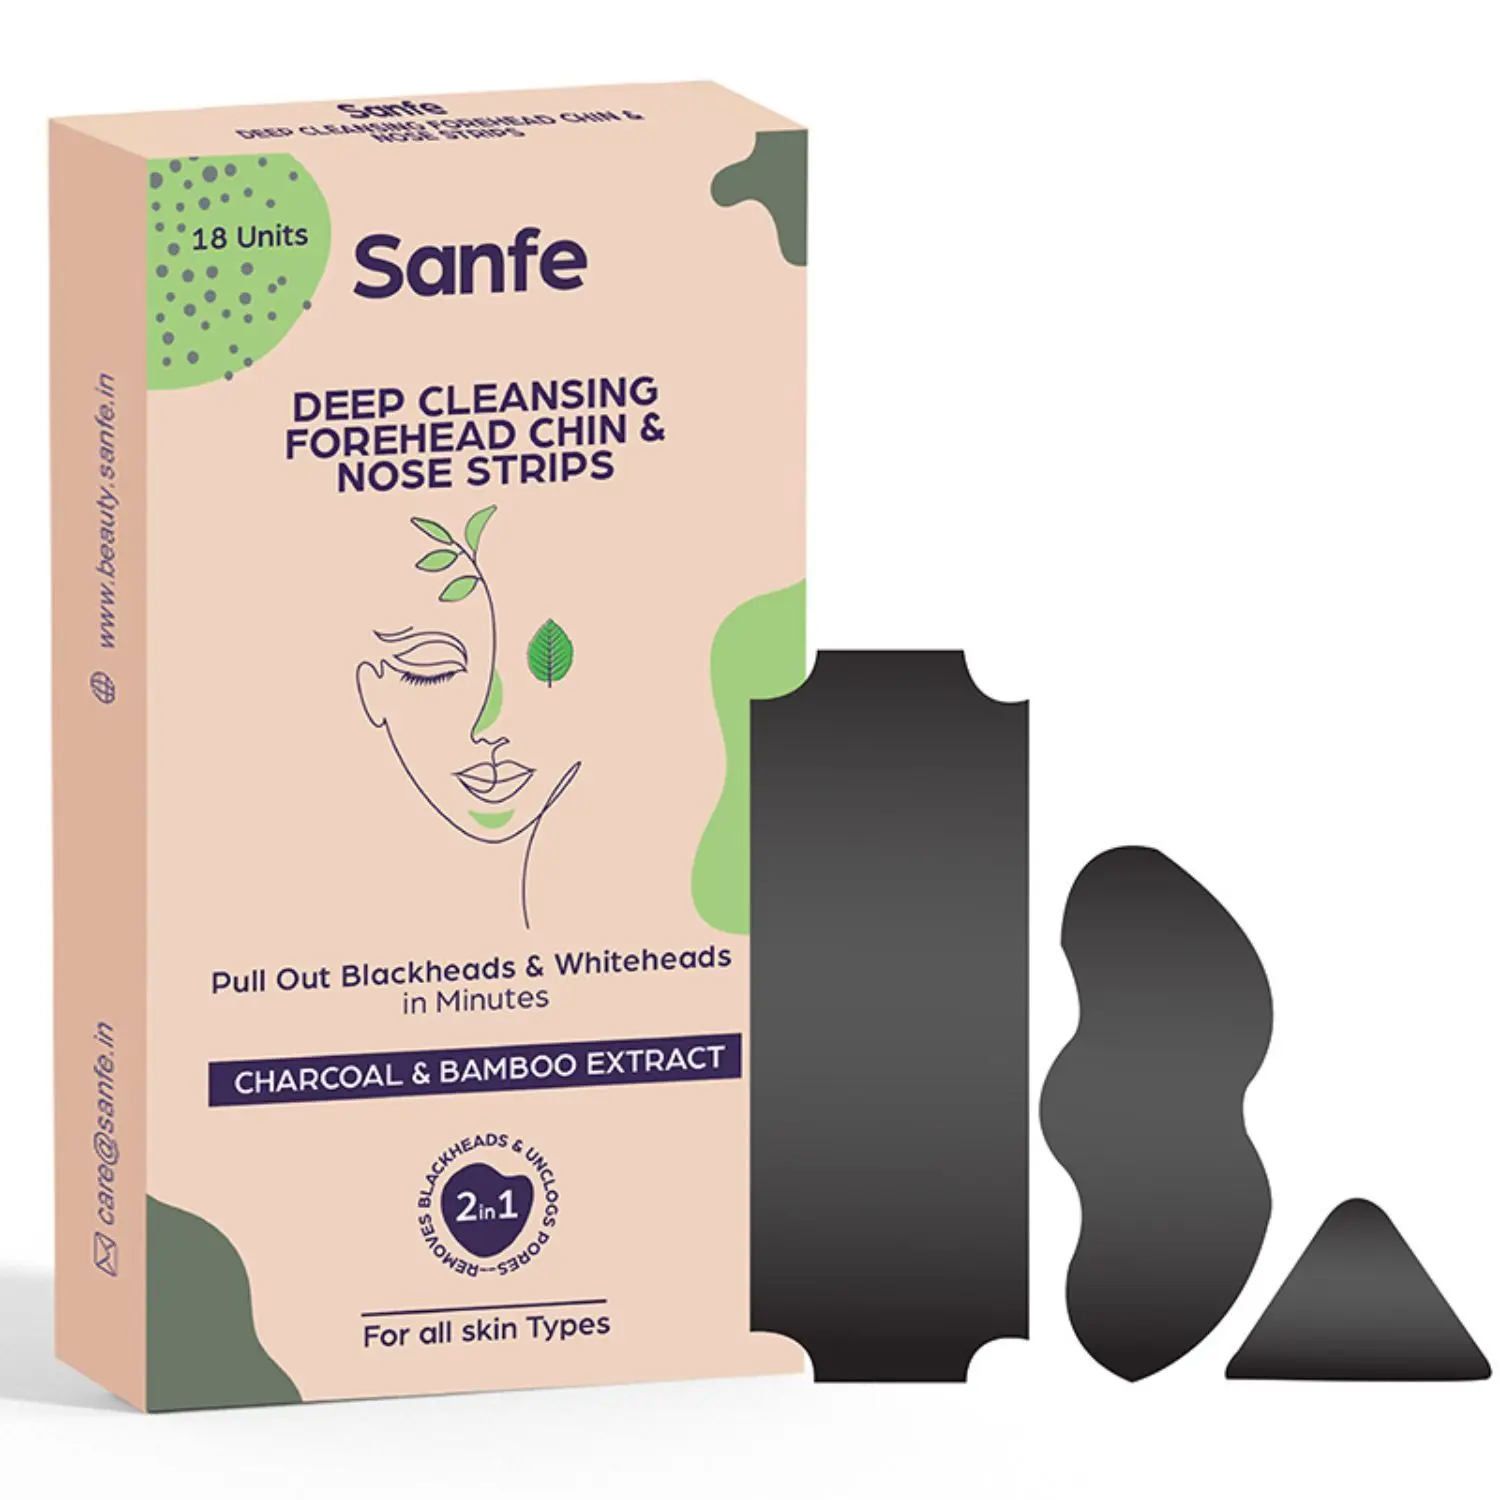 Sanfe Deep Cleansing Forehead, Chin & Nose Strips | Removes unwanted blackheads, whiteheads, oil and dirt instantly & painlessly